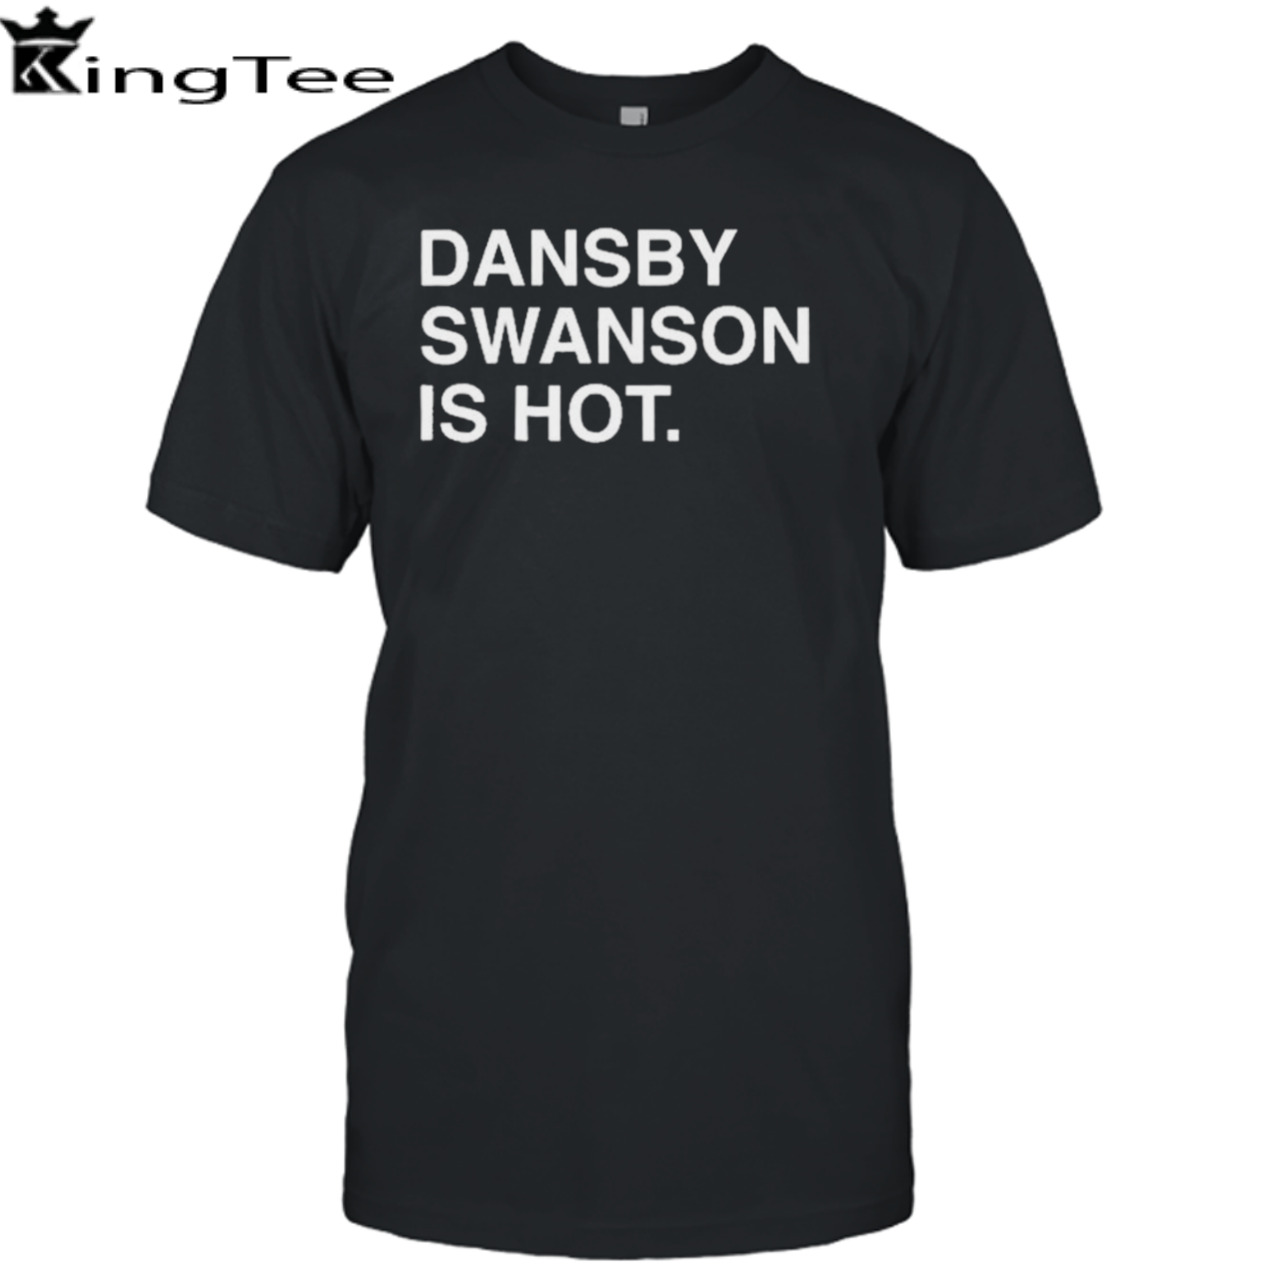 Dansby Swanson Is Hot Shirt